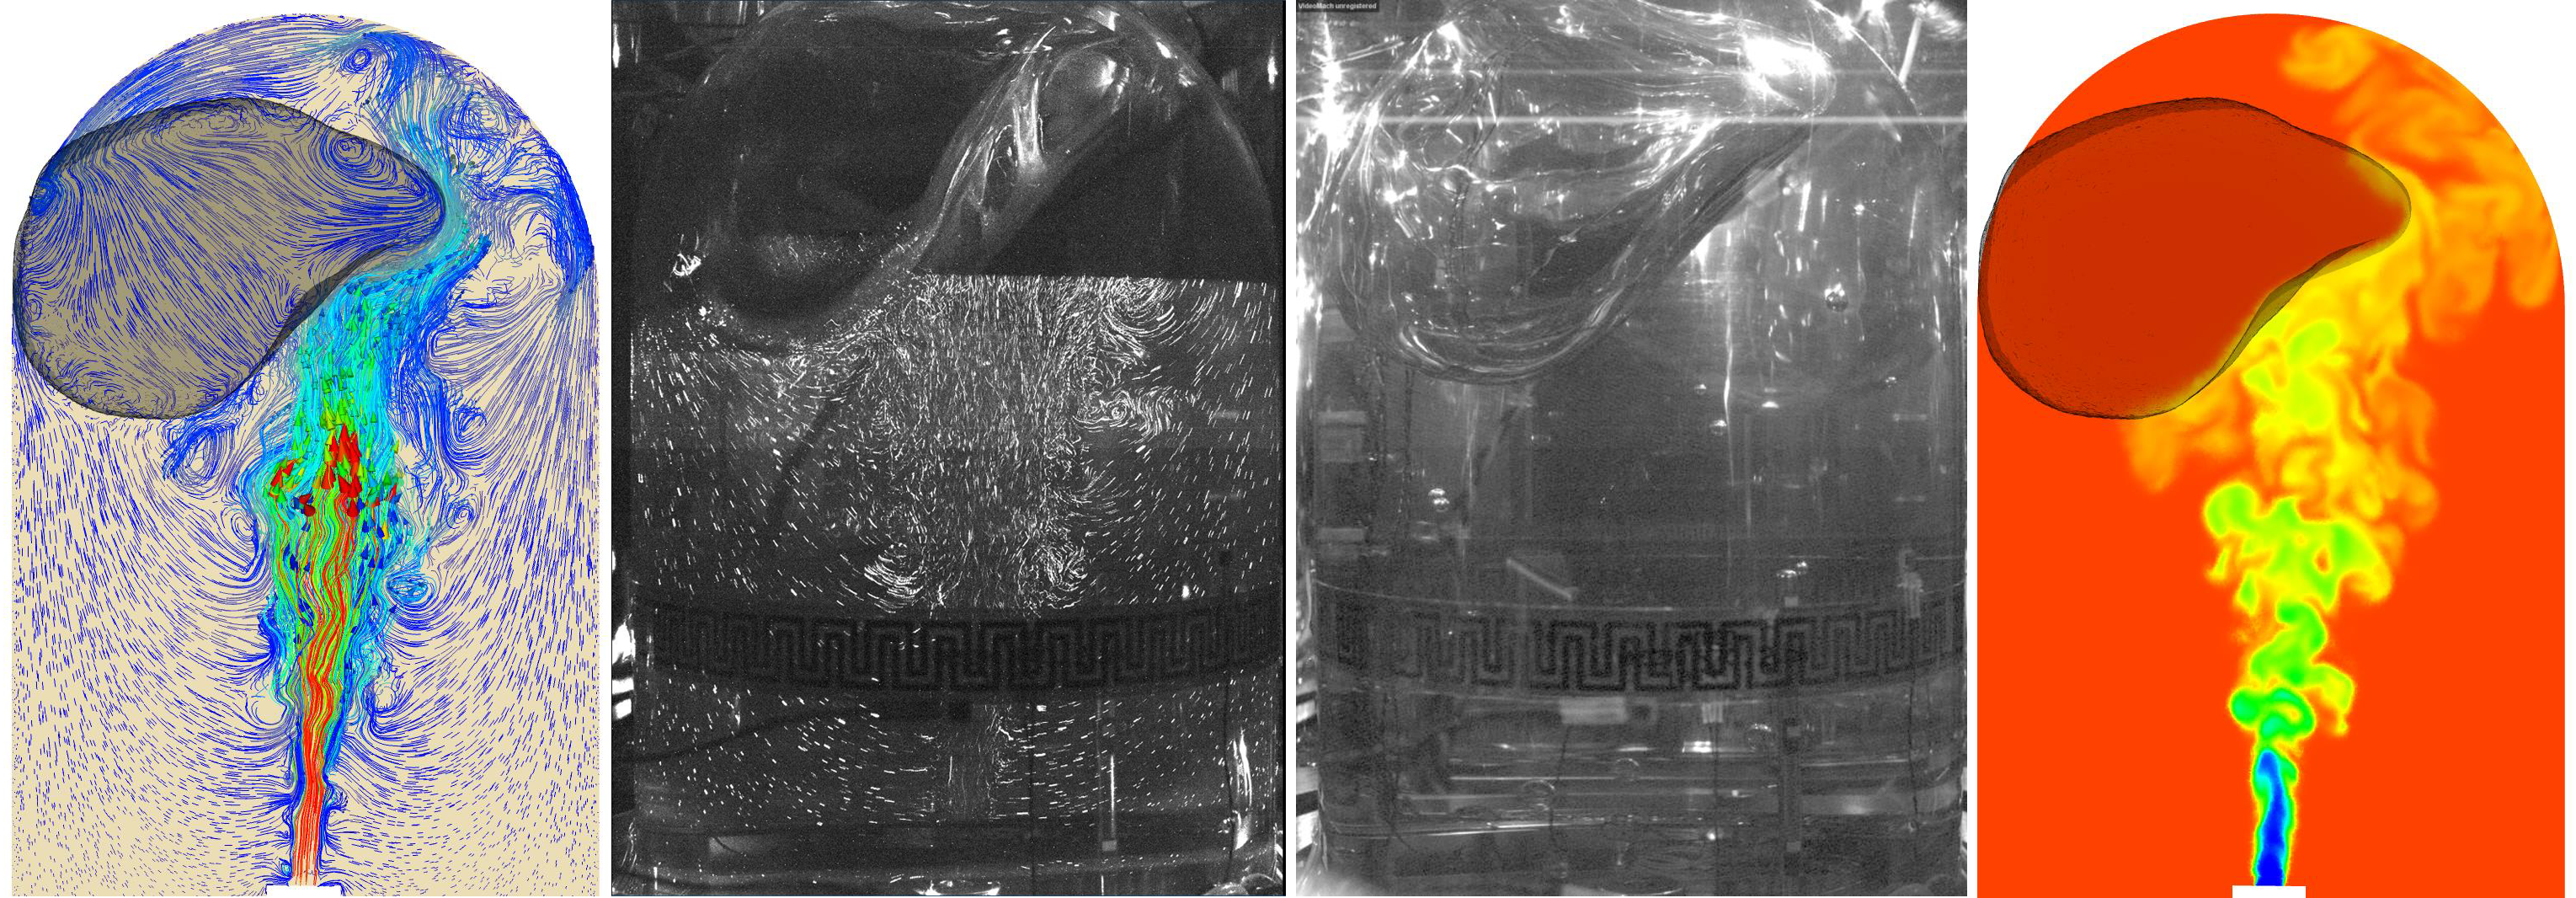 Four pictures side-by-side showing the results of a ZBOT pressure control jet mixing experiment in microgravity. The first picture shows a jet flow distinguished by blue, yellow, and red colored flow pathlines emanating from a flow nozzle in the bottom of the tank. The jet flow impinges on the ullage from below and deforms the ullage that was initially spherical into a shape that resembles the head of a bird with a pointed beak projected to the right. The second picture an experimental image captured by the Particle Imaging Velocimetry diagnostics. Tiny micron-sized particles illuminated by a laser sheet form shiny steak lines against a black background that displays the path of the fluid motion. The experimental pathlines resemble closely the CFD flow pathlines predicted by the CFD simulation as shown in the left-hand side picture. The third image shows a white-light image that captures the shape of the ullage positioned at the top left-hand side of the tank. This experimental image also shows the deformation of the ullage by the jet into a bird-head shaped figure confirming the shape and position of the ullage predicted by the CFD model. The last image shows the CFD prediction of the vortexed thermal structures that are created by the jet flow and represented by blue, yellow, and red temperature contours.